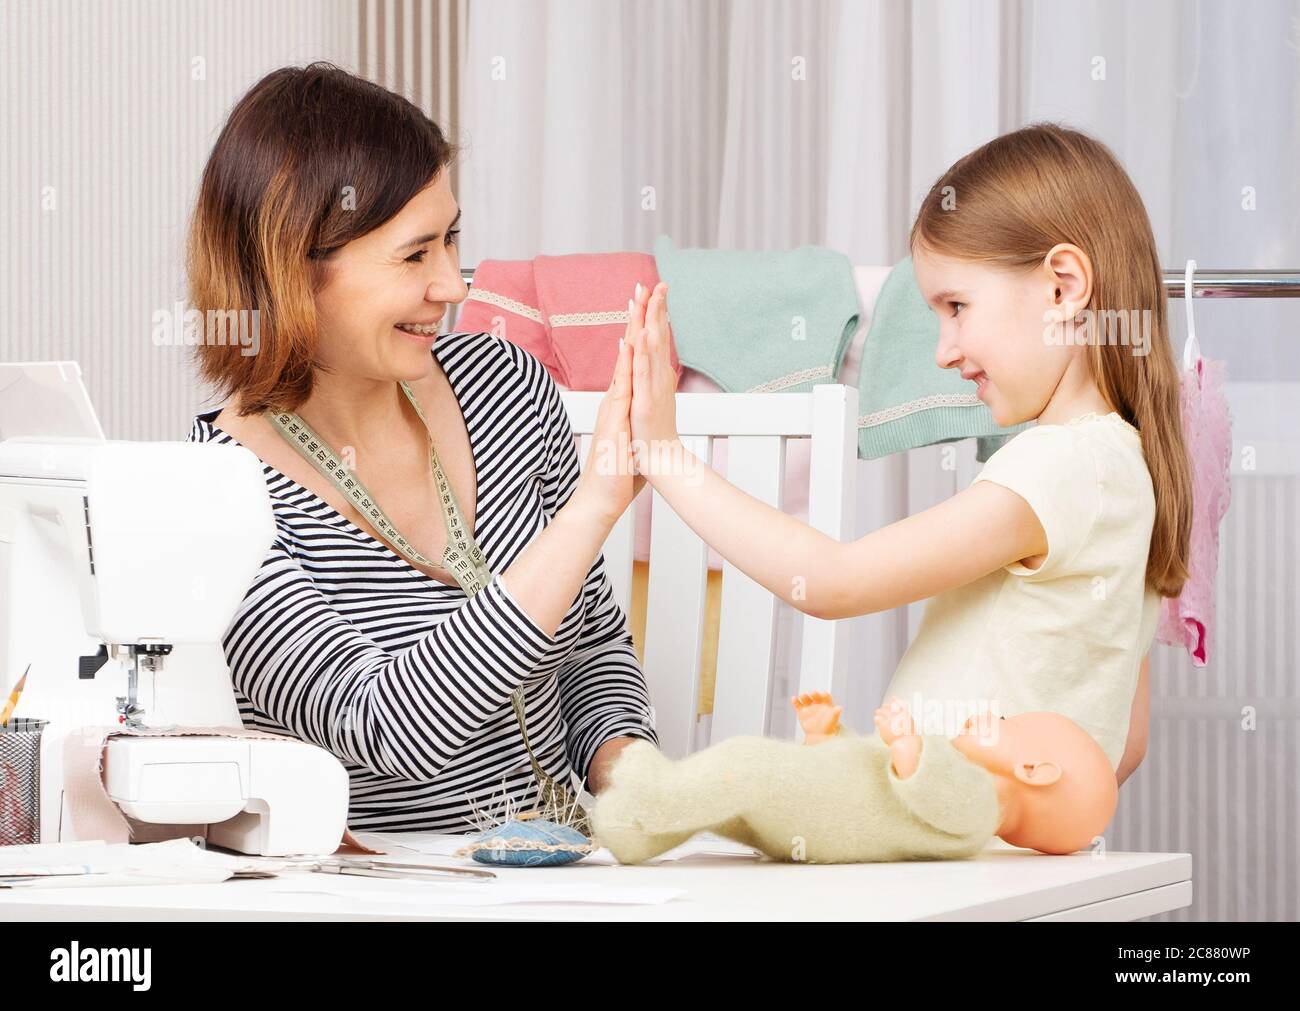 Smiling girl and woman making perfect and efficient sewing team Stock Photo